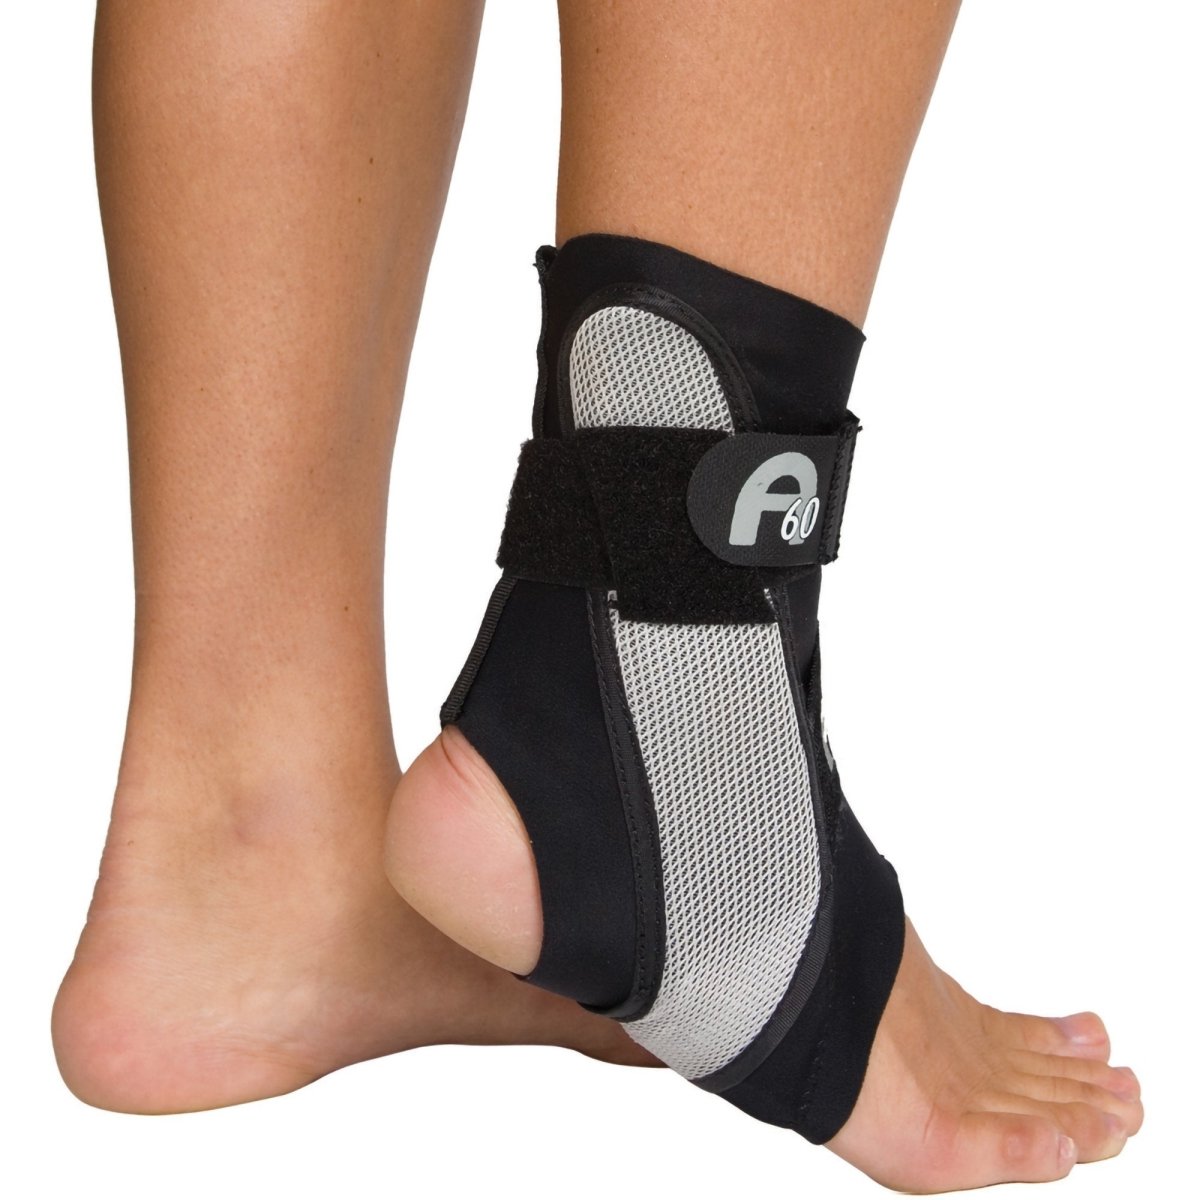 Aircast A60 Left Ankle Support - 566911_EA - 1